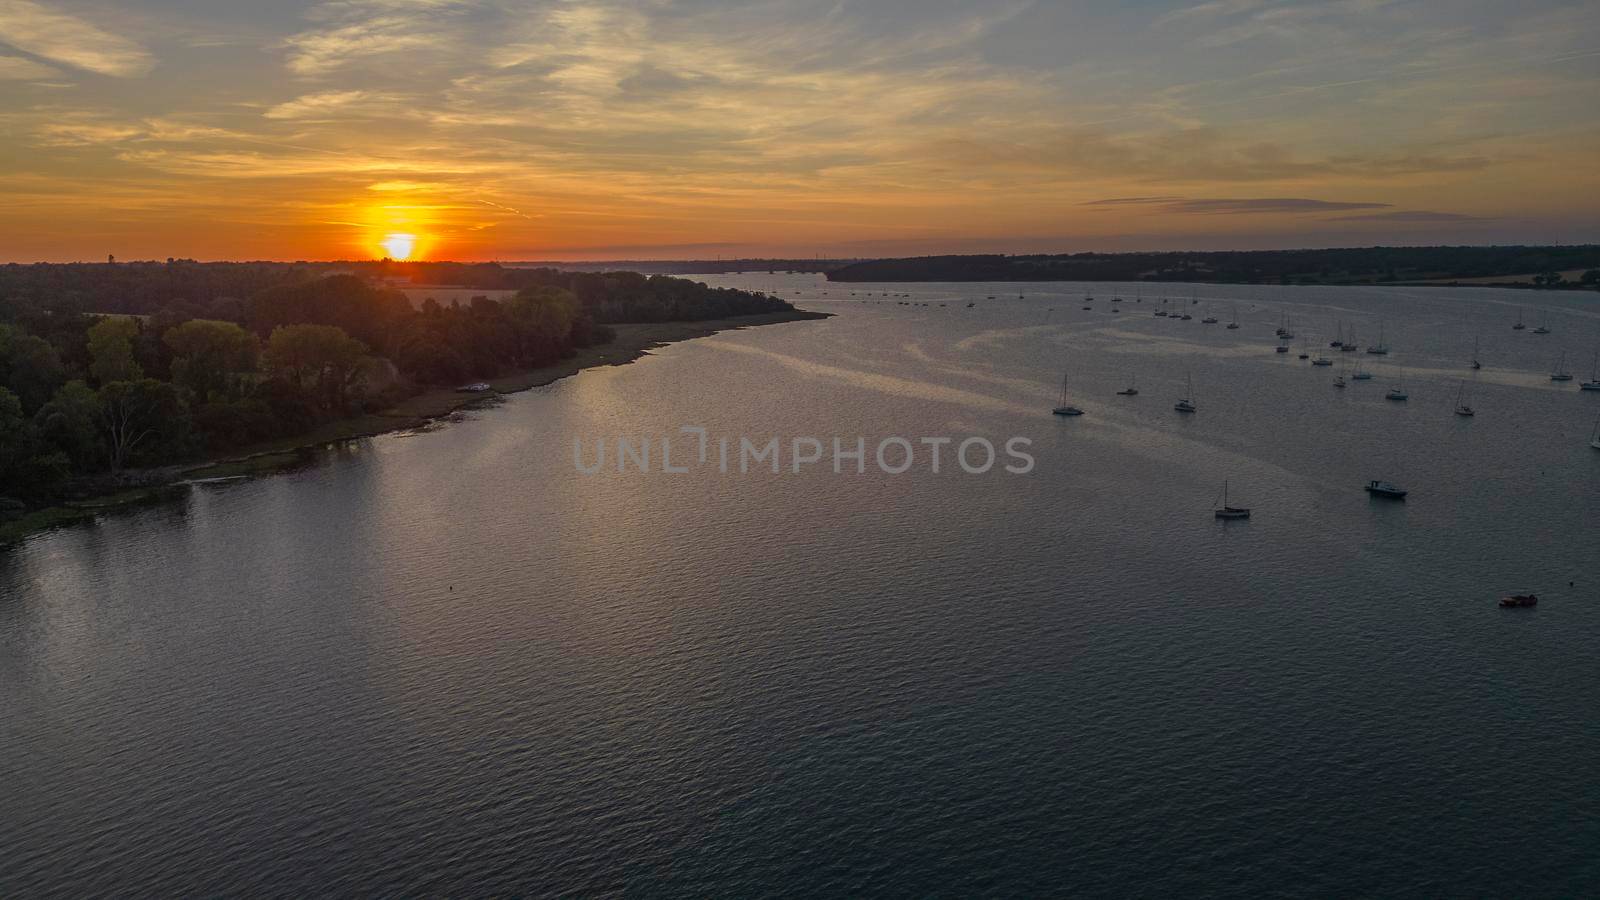 Sunset just touching down with the River Orwell in the foreground